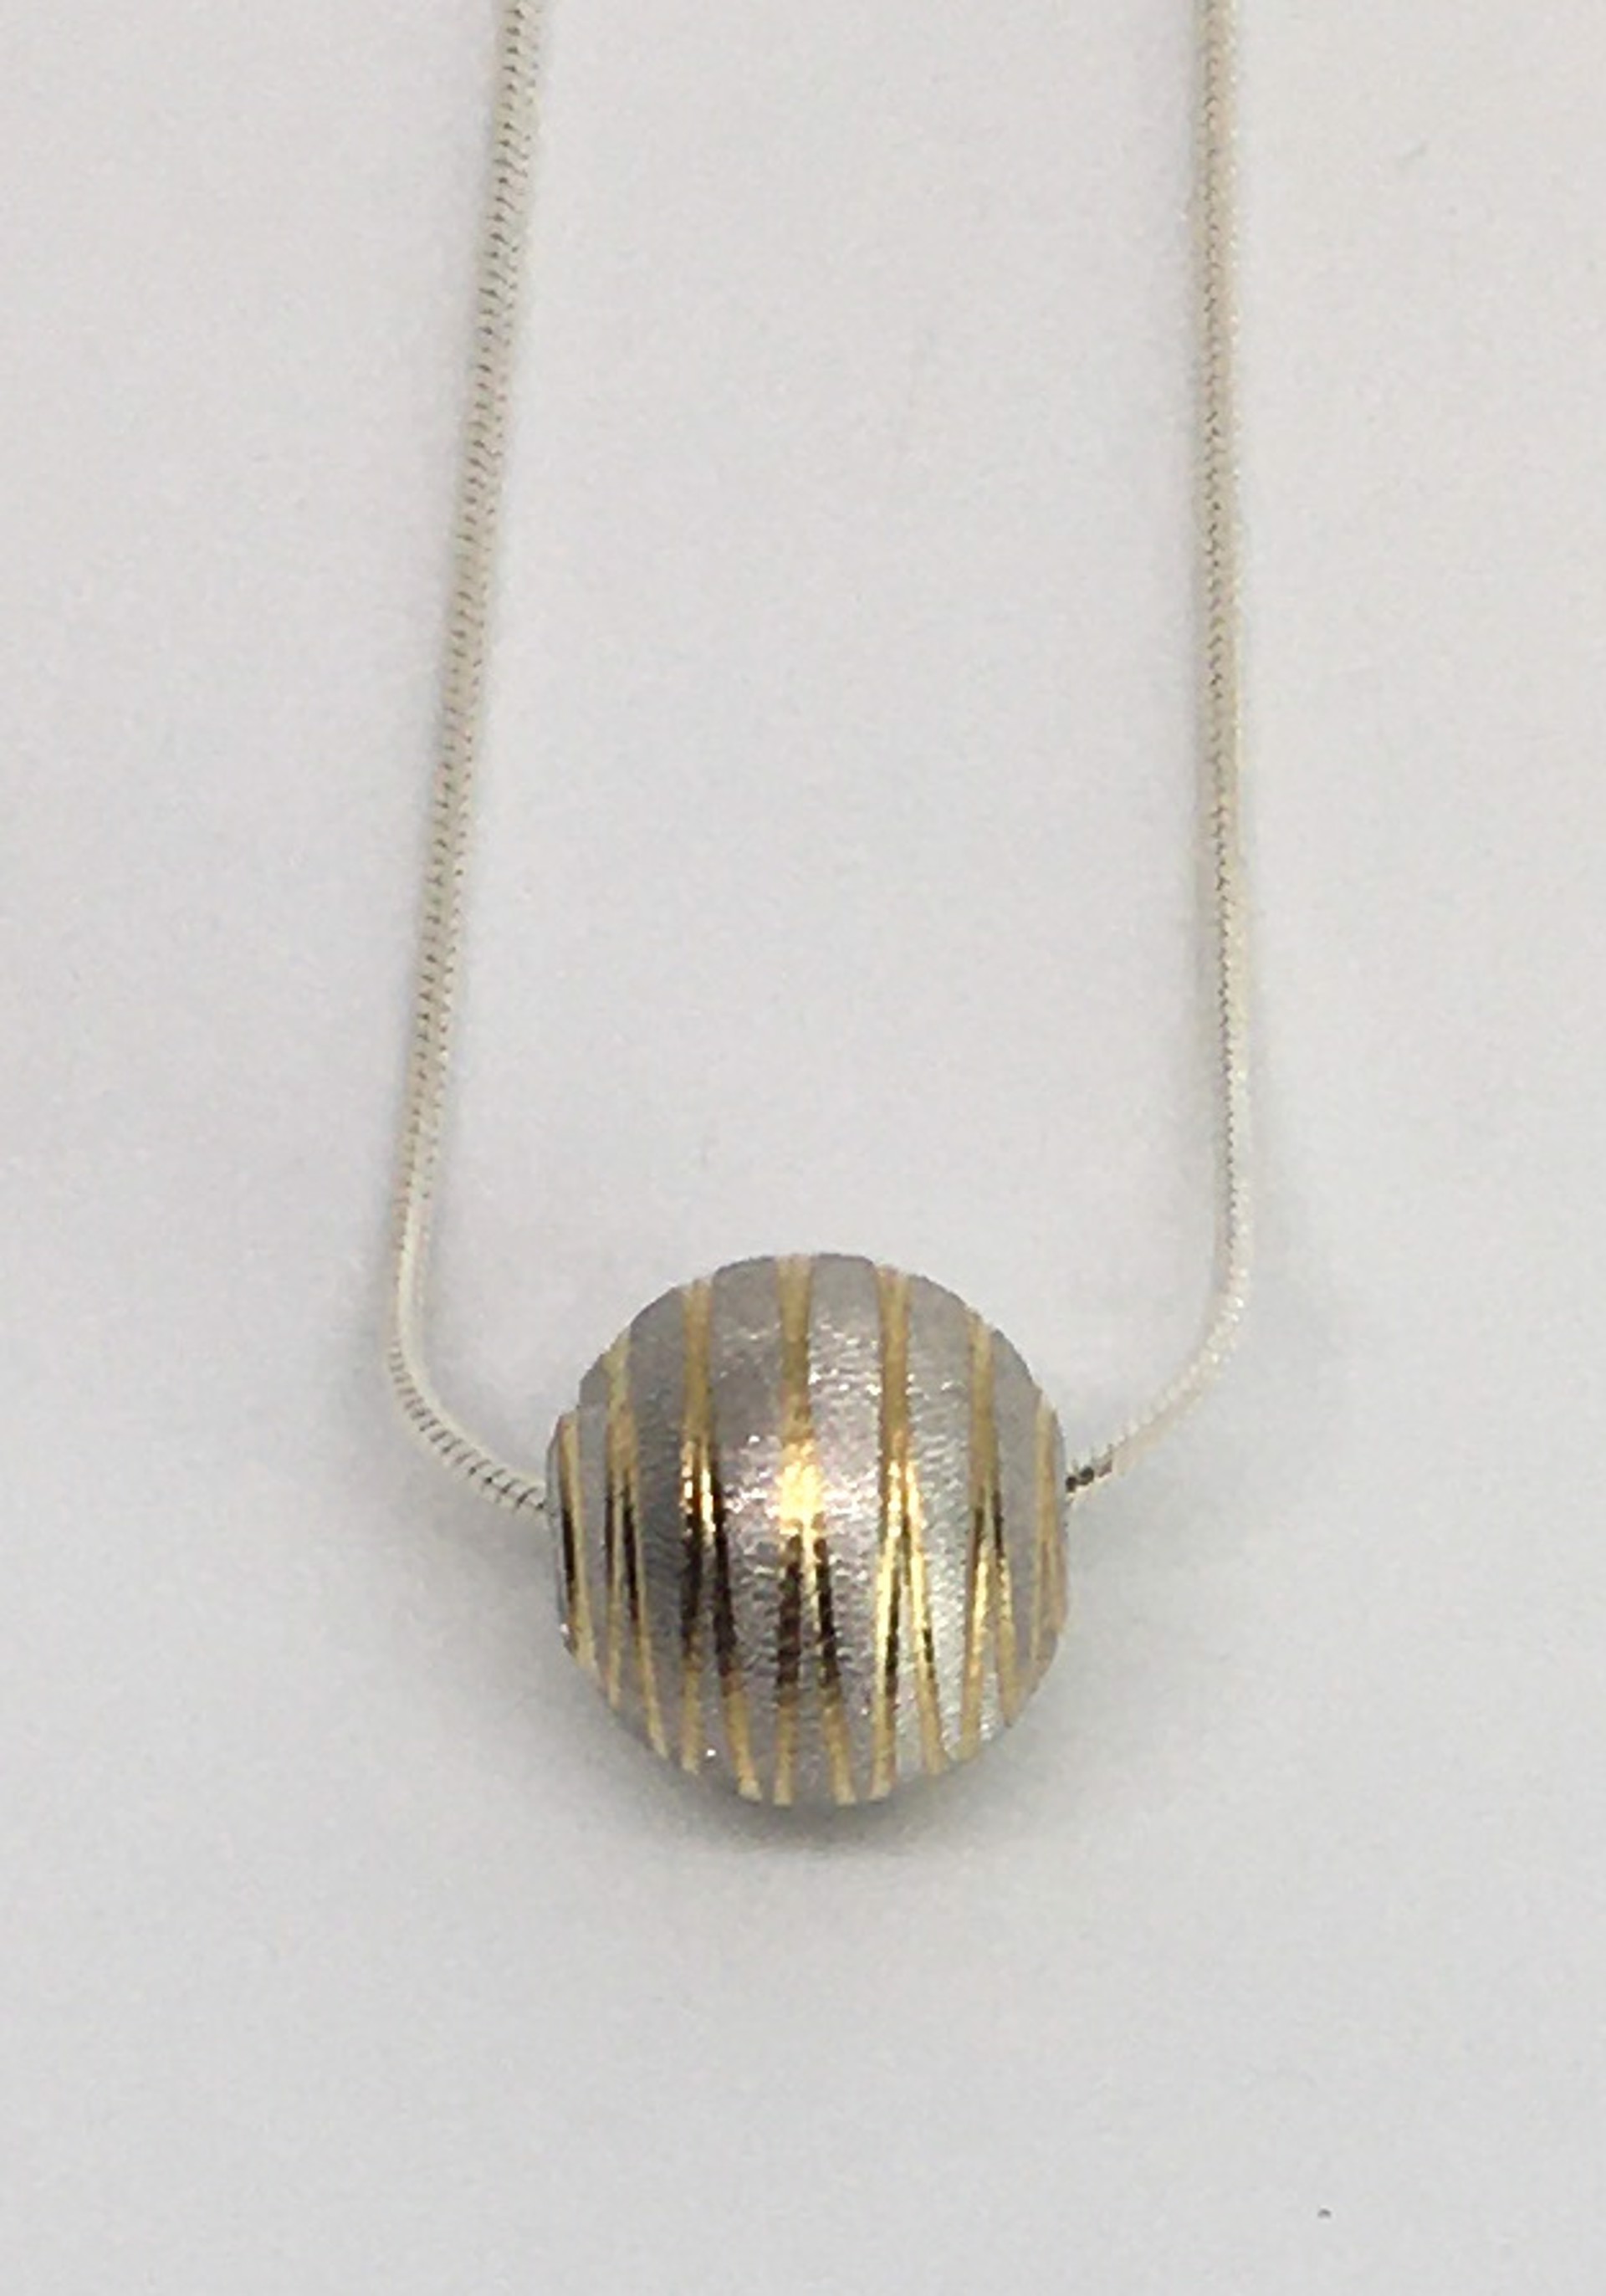 Eunity Silver with Gold Swirl Bead Necklace - Sterling Silver  by Suzanne Woodworth